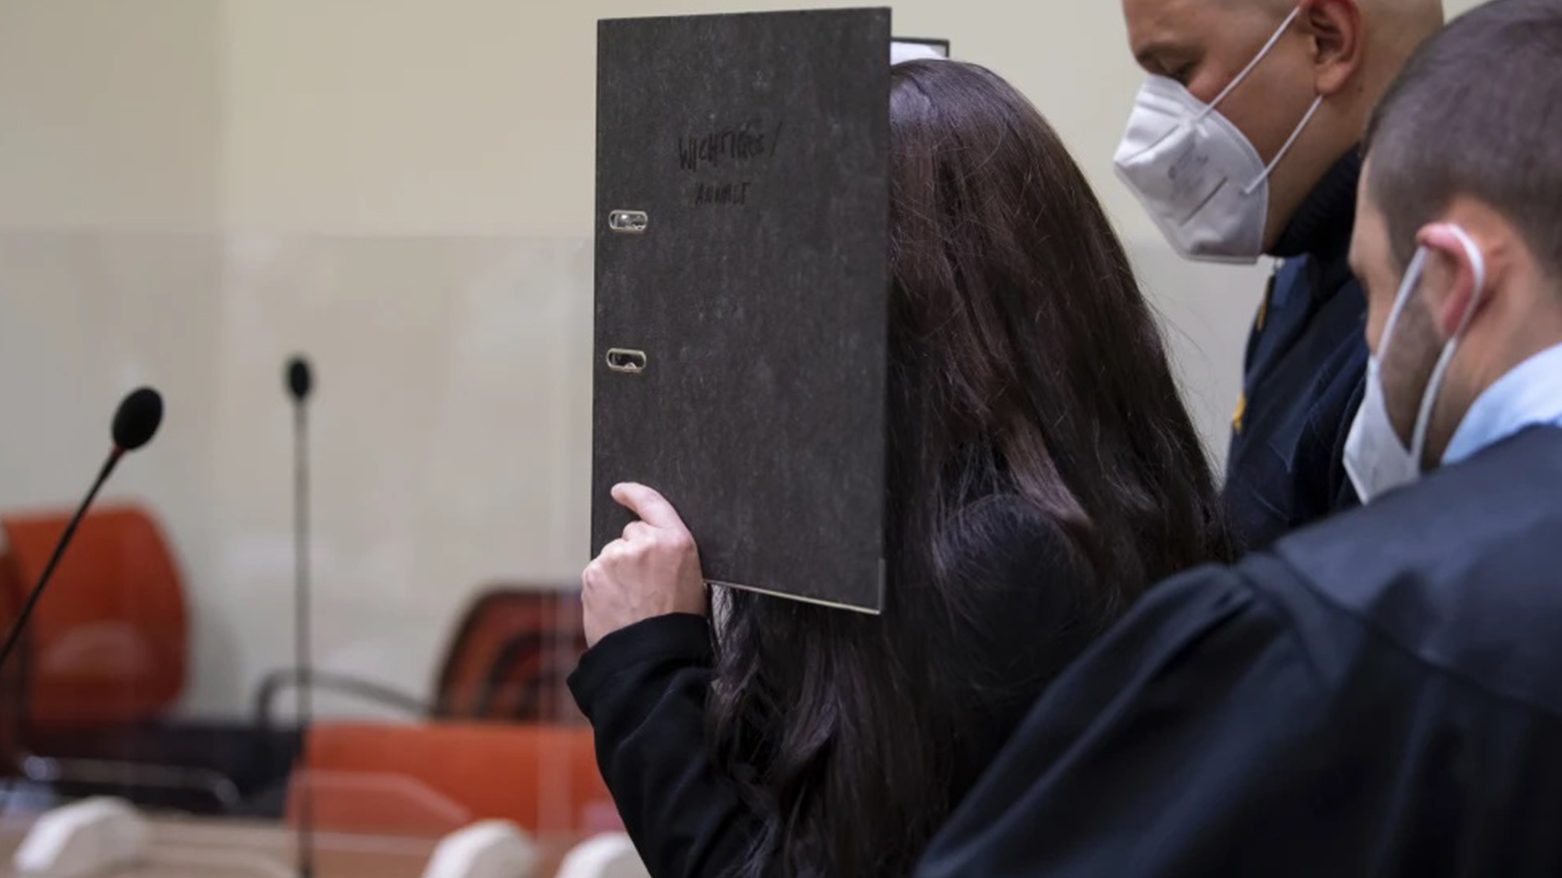 Defendant Jennifer W. arrives in a courtroom for her trial in Munich, Germany, Oct. 25, 2021. (Photo: AP)